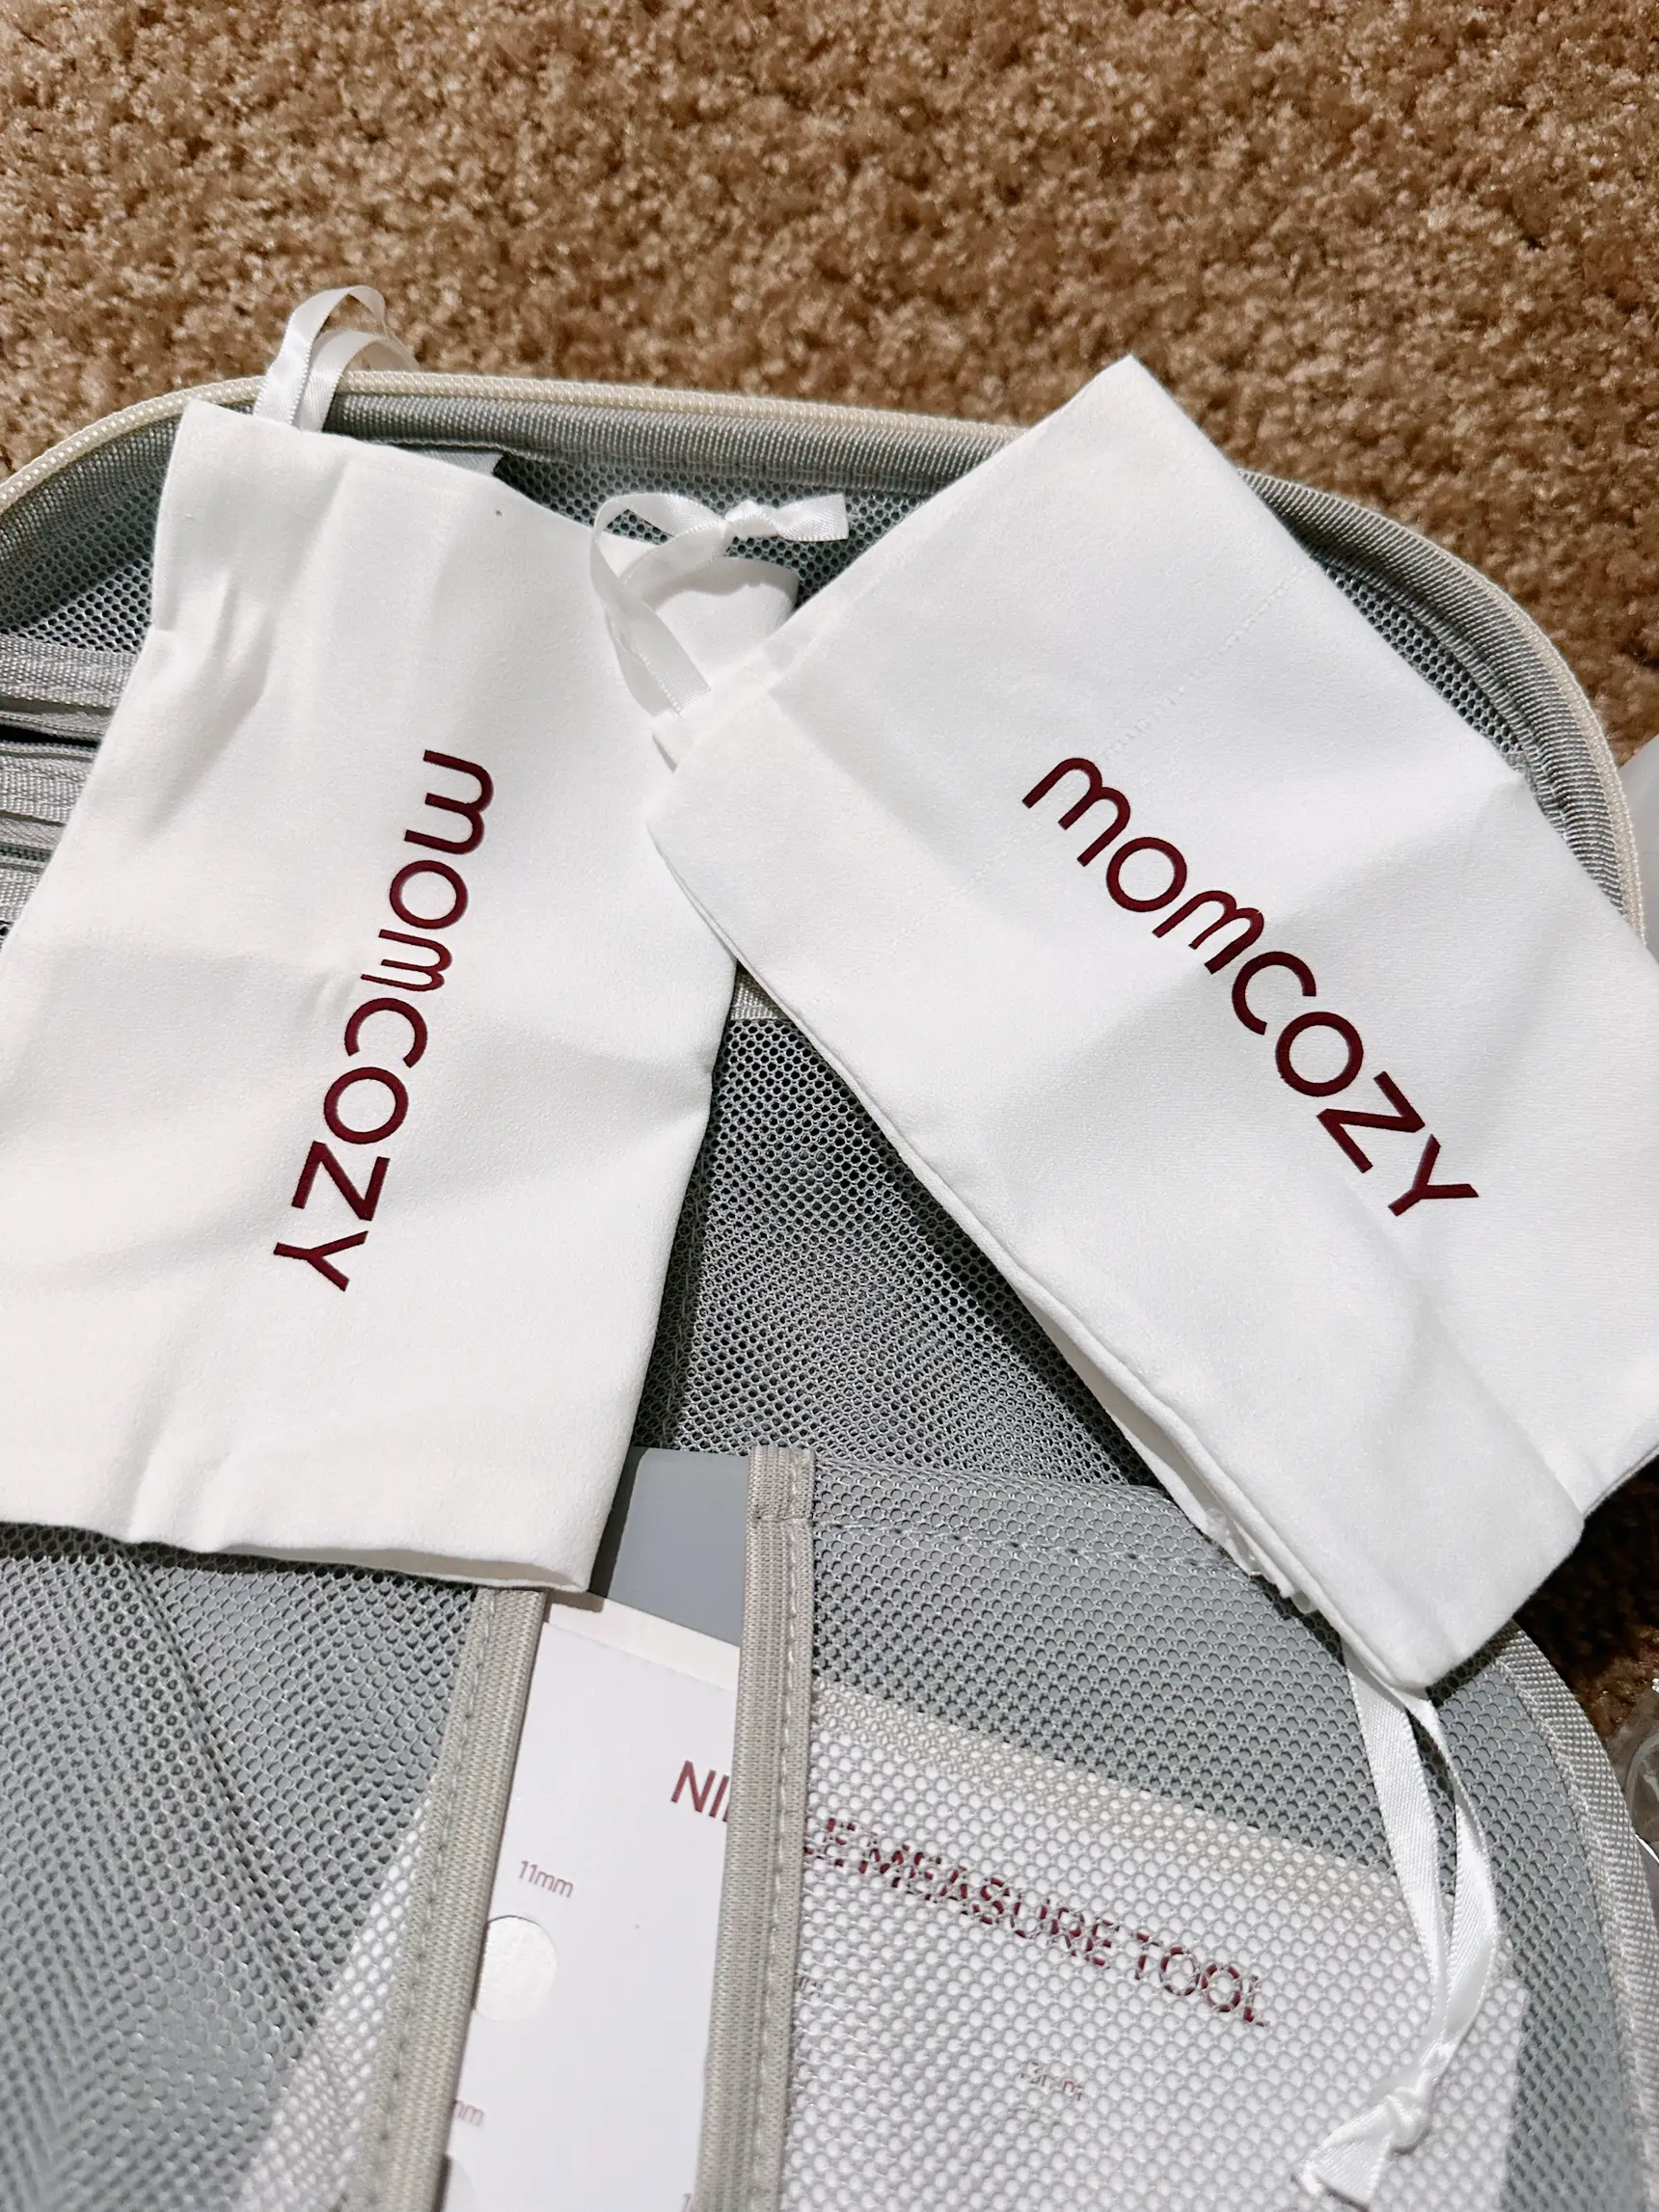 Momcozy M5 Breast Pump Bag, Pump Carrying Case for Wearable Breast Pump 